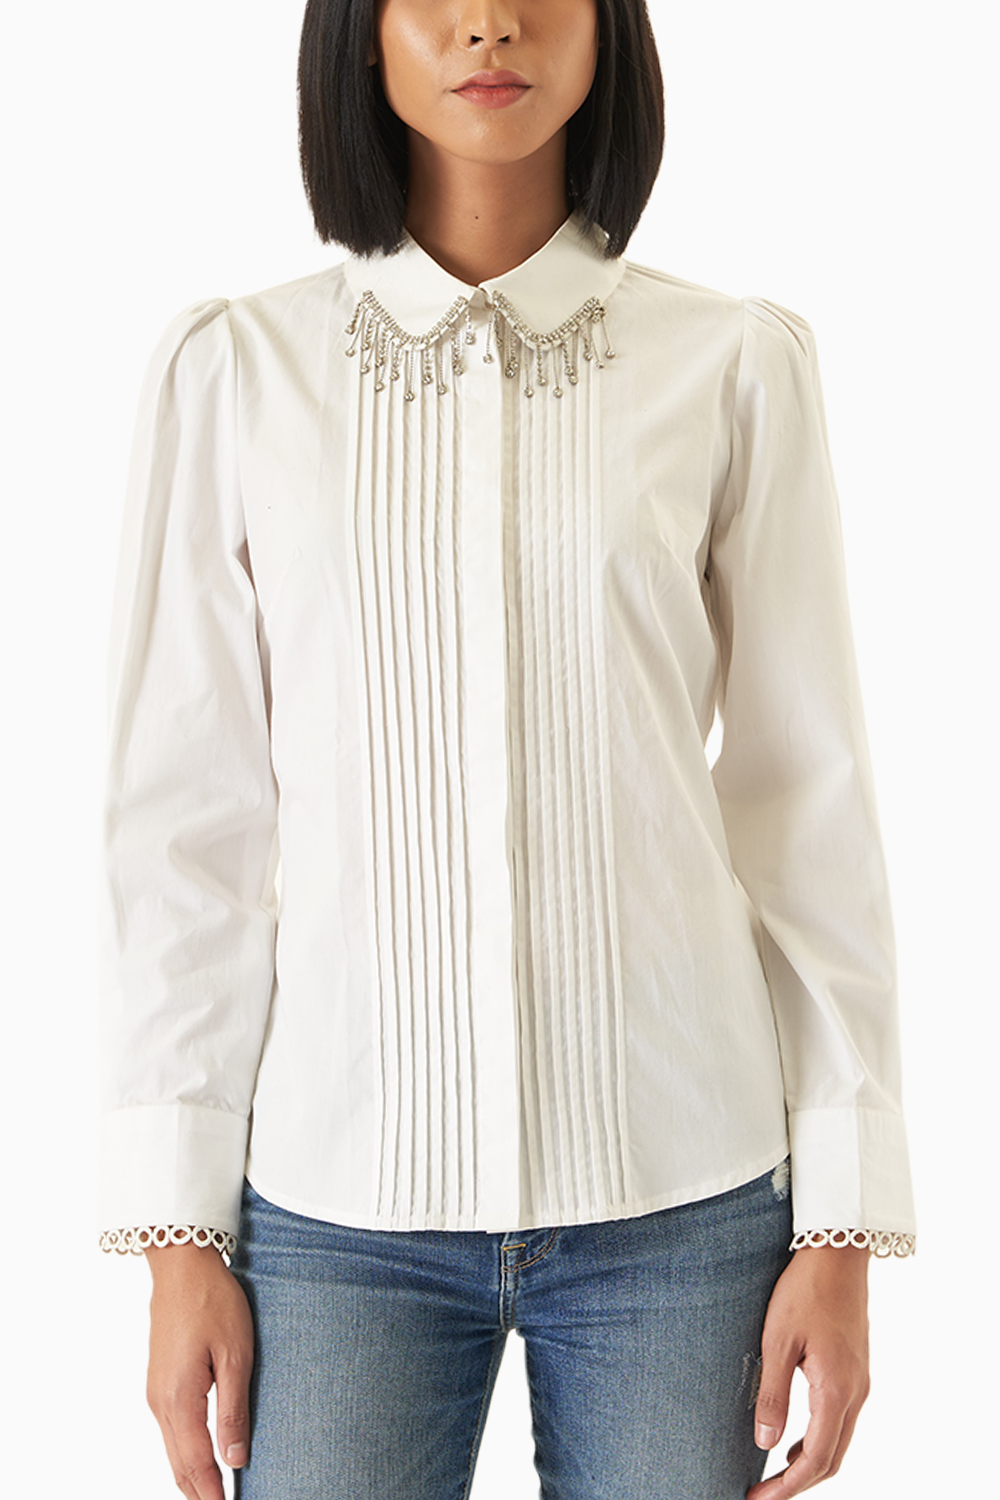 White Pintucked Shirt with Embellished Collar